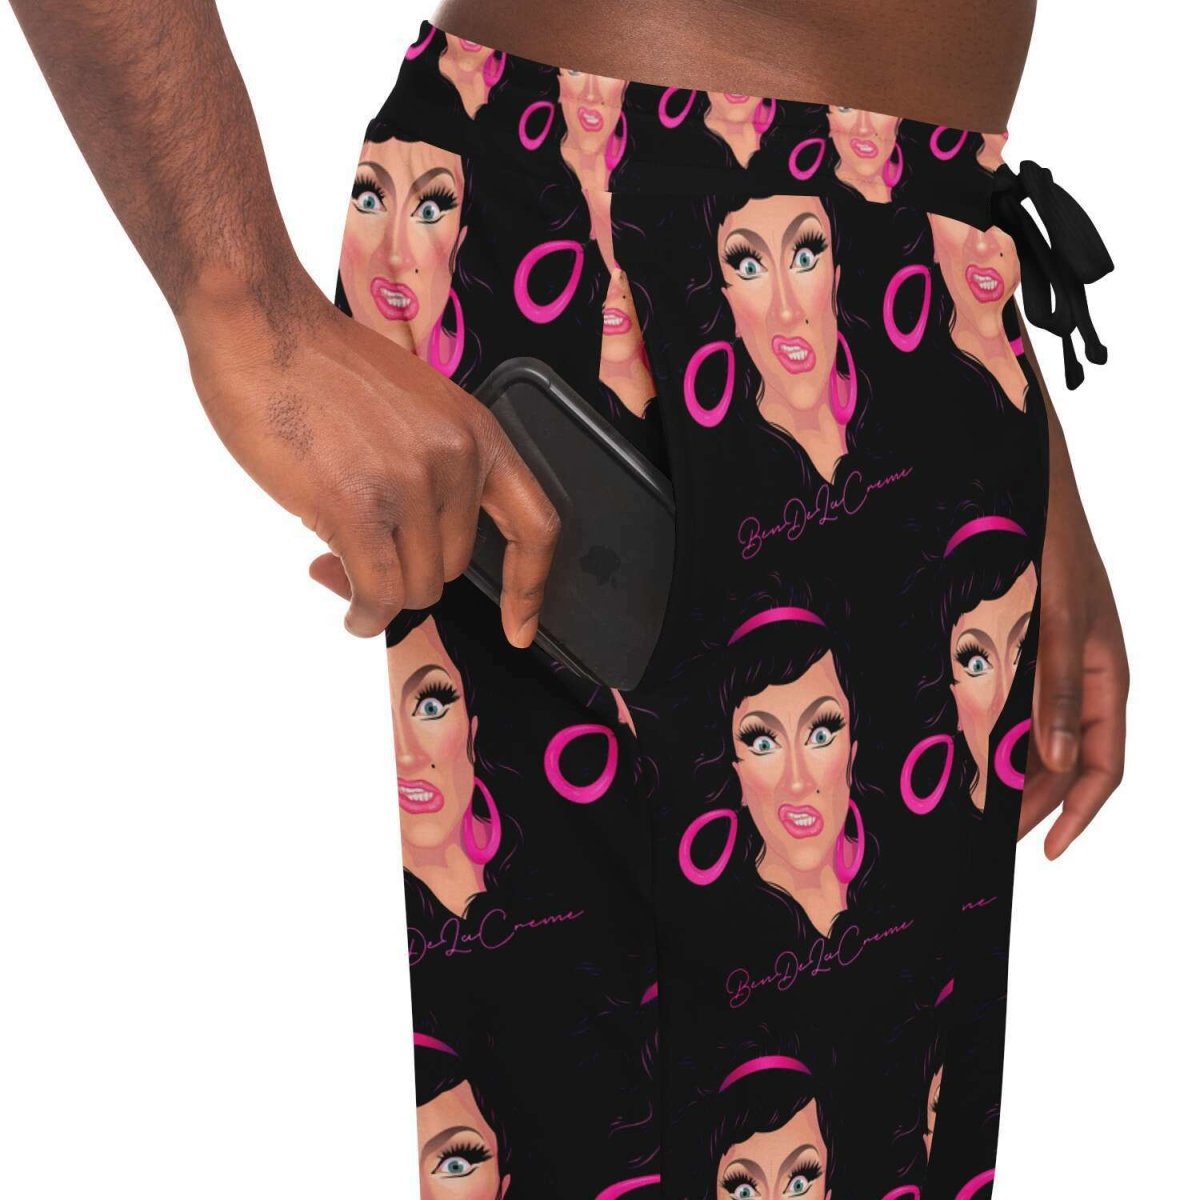 Bendelacreme "Pattern" All Over Print Jogger - dragqueenmerch